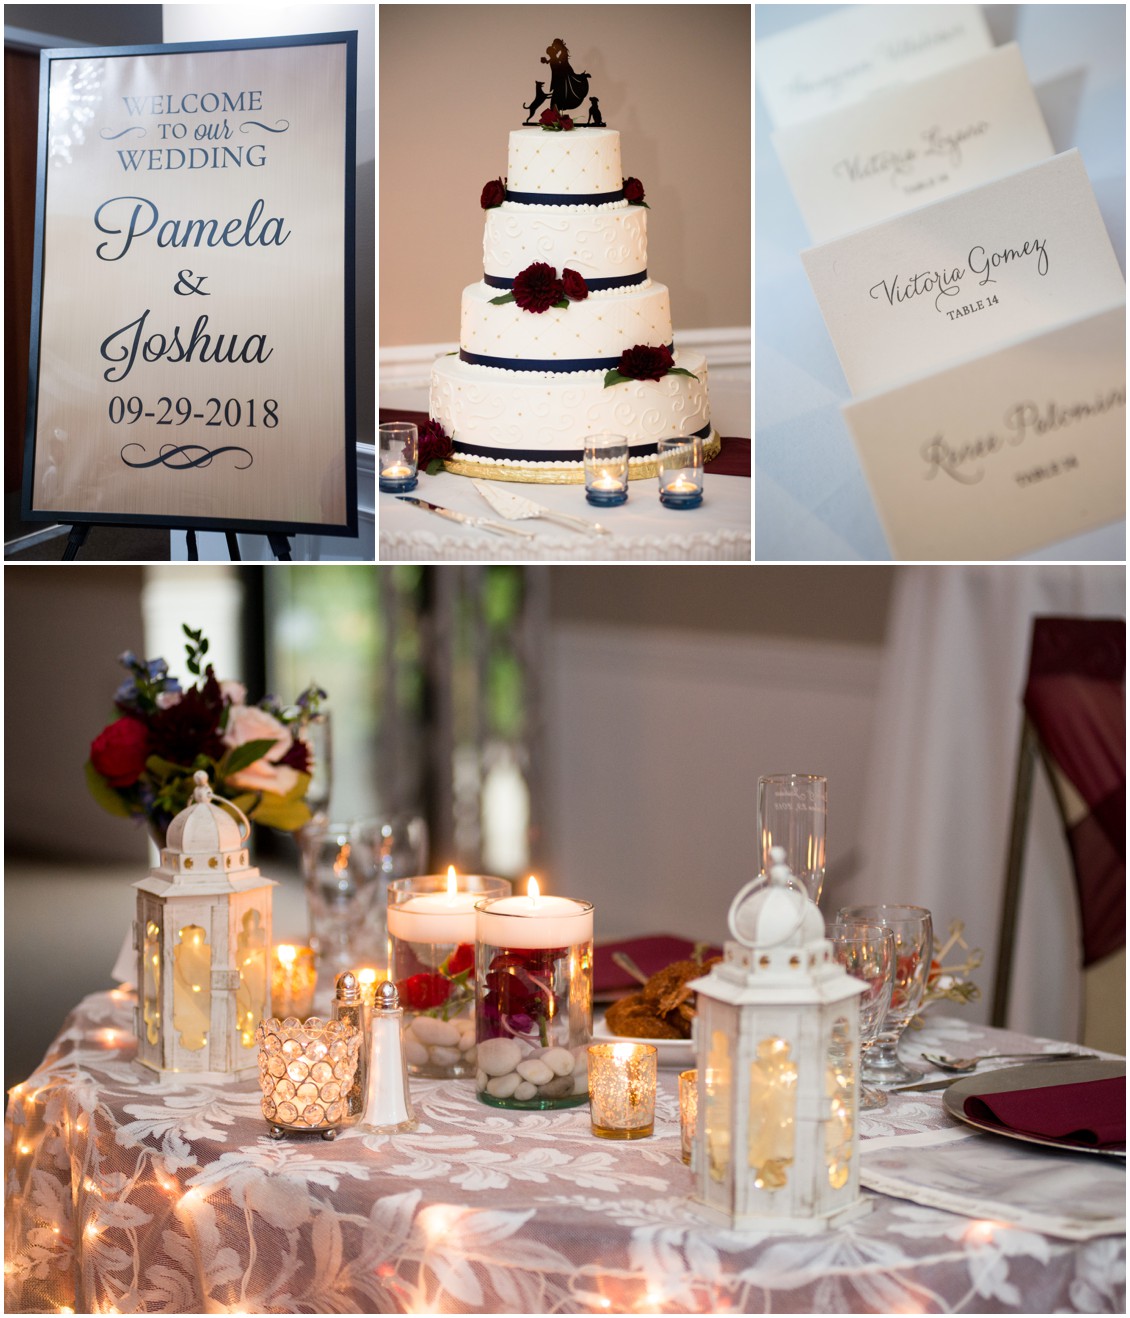 Eastern Shore reception details cake and tablescapes Melissa Grimes-Guy Photography